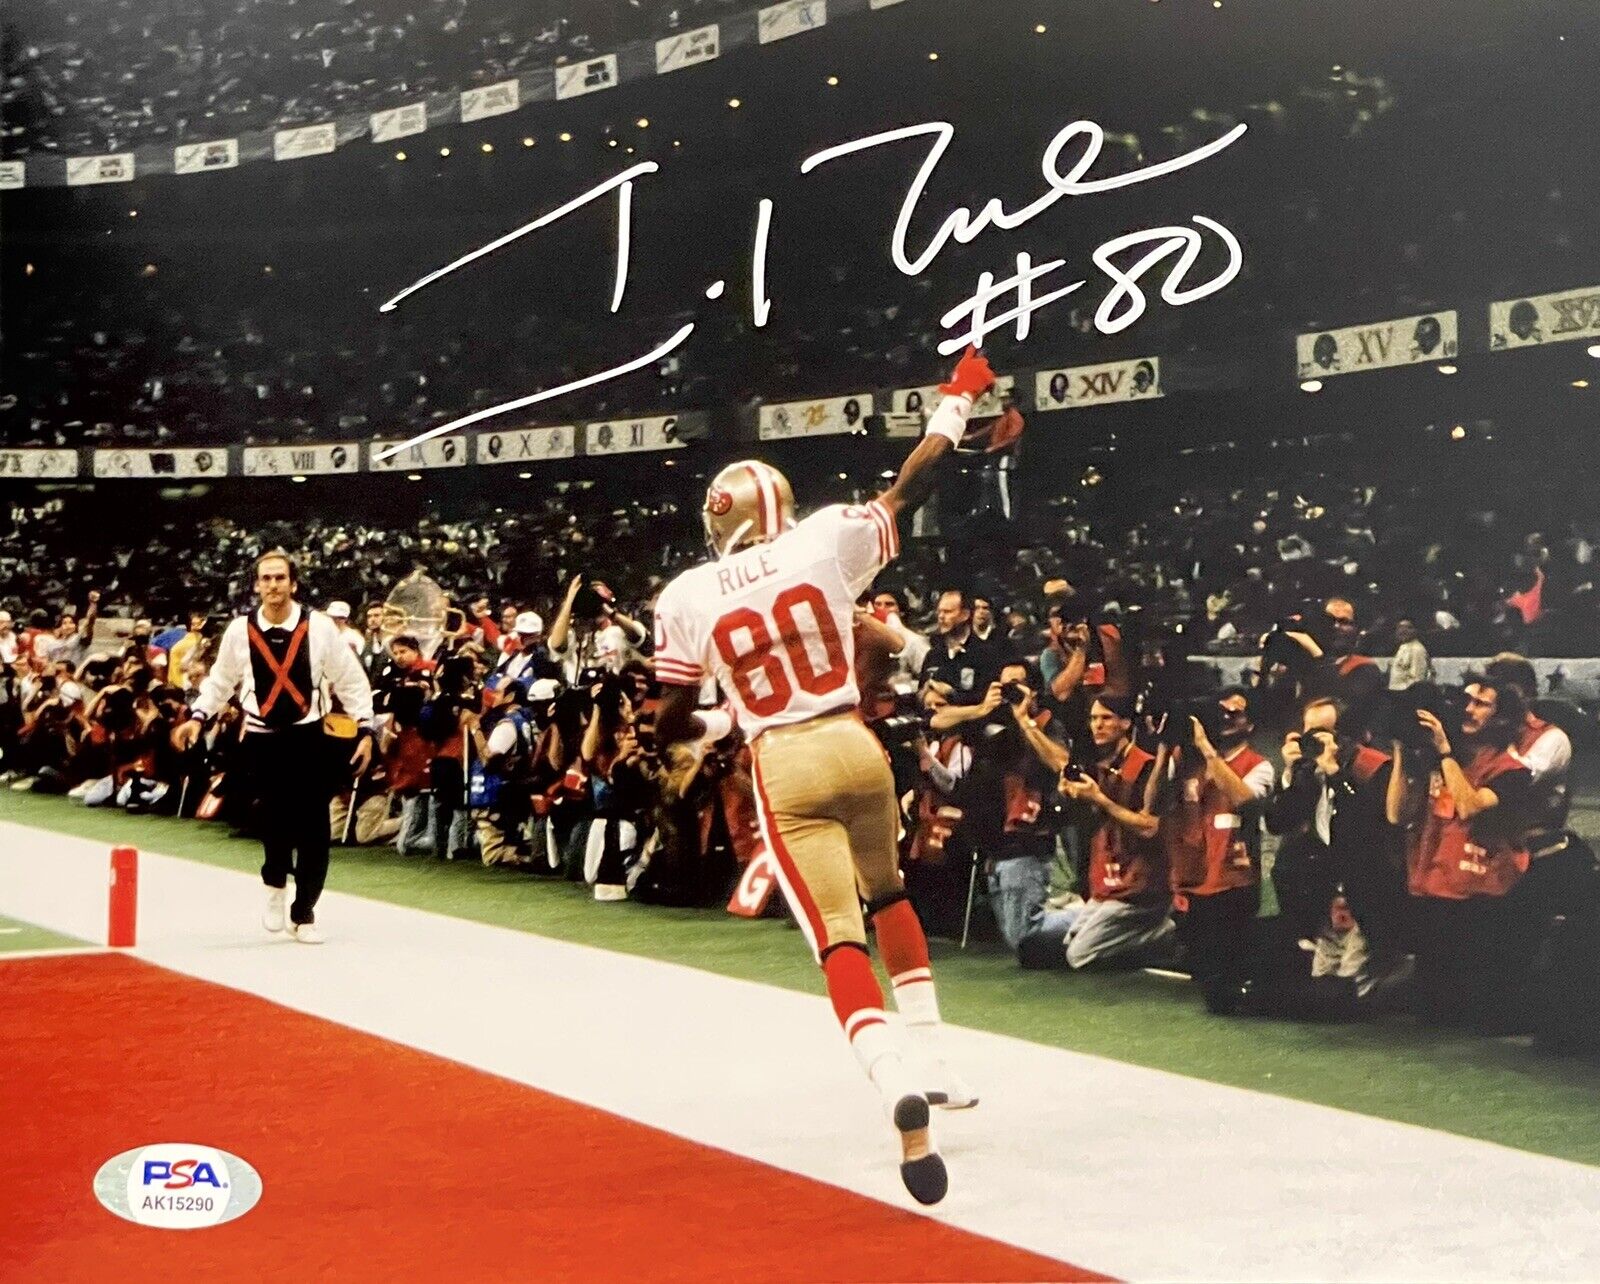 Jerry Rice Signed Autographed San Francisco 49ers 8x10 Photo Poster painting GOAT PSA/DNA